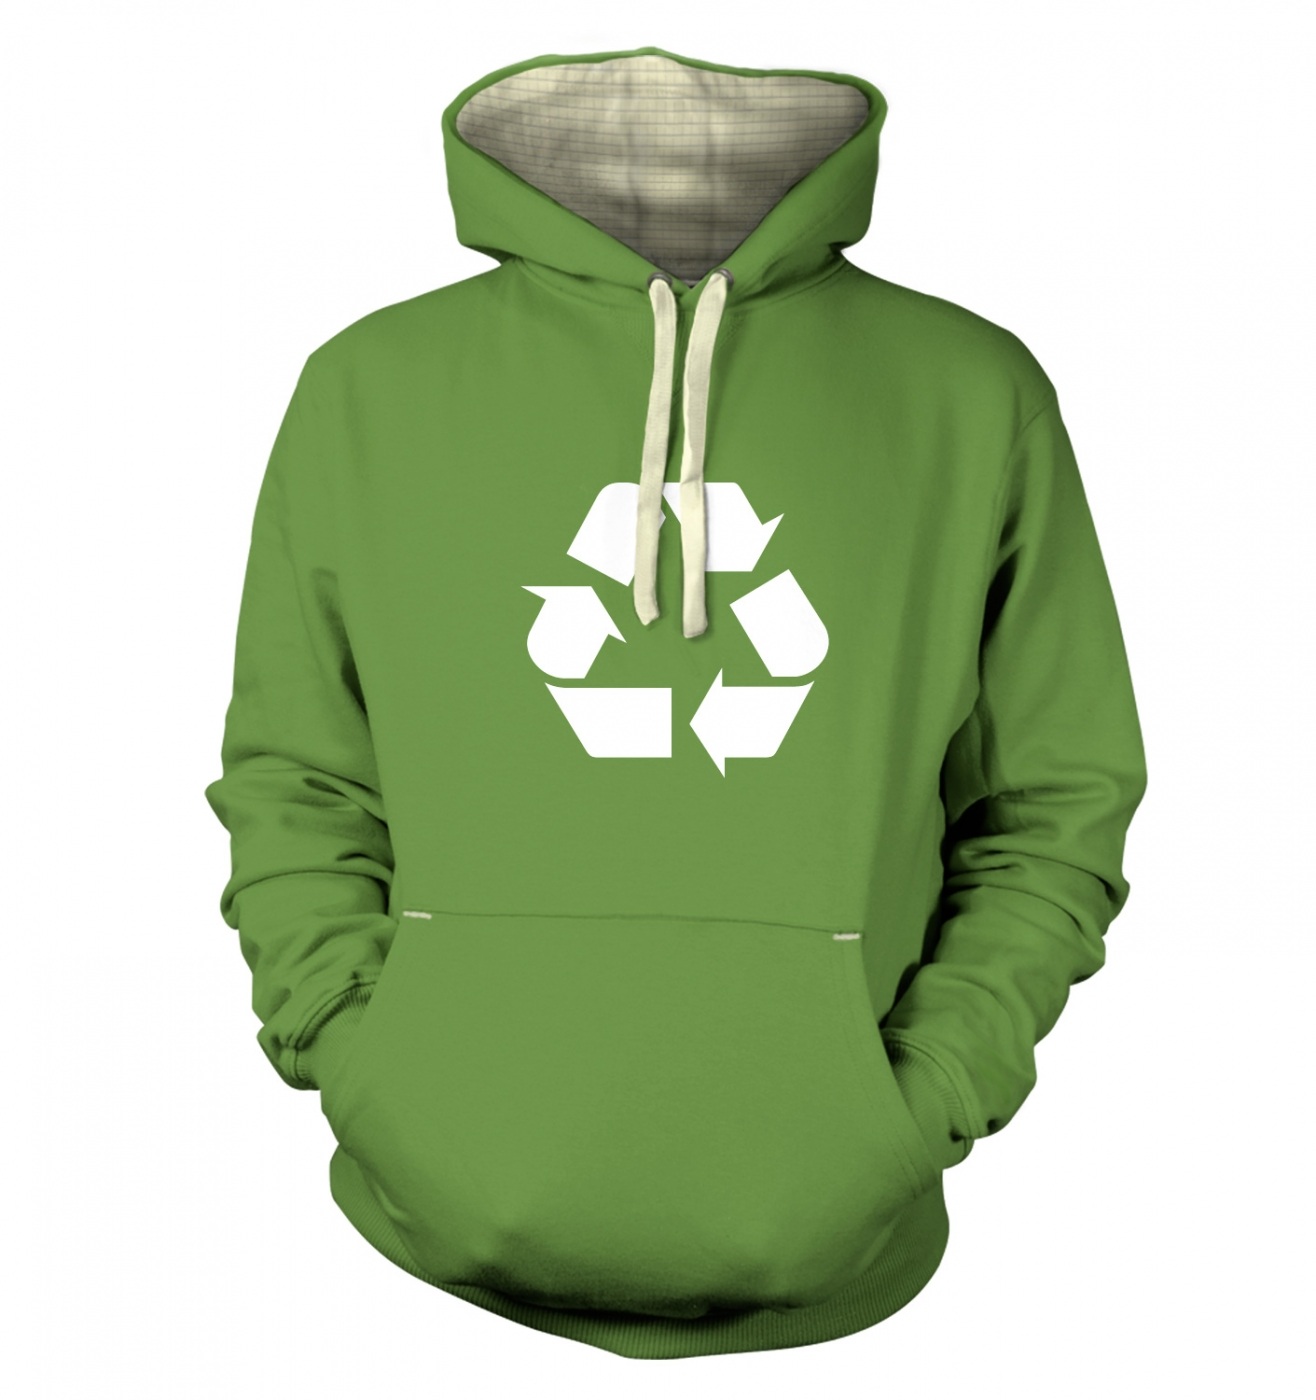 White Recycling Symbol kid's t-